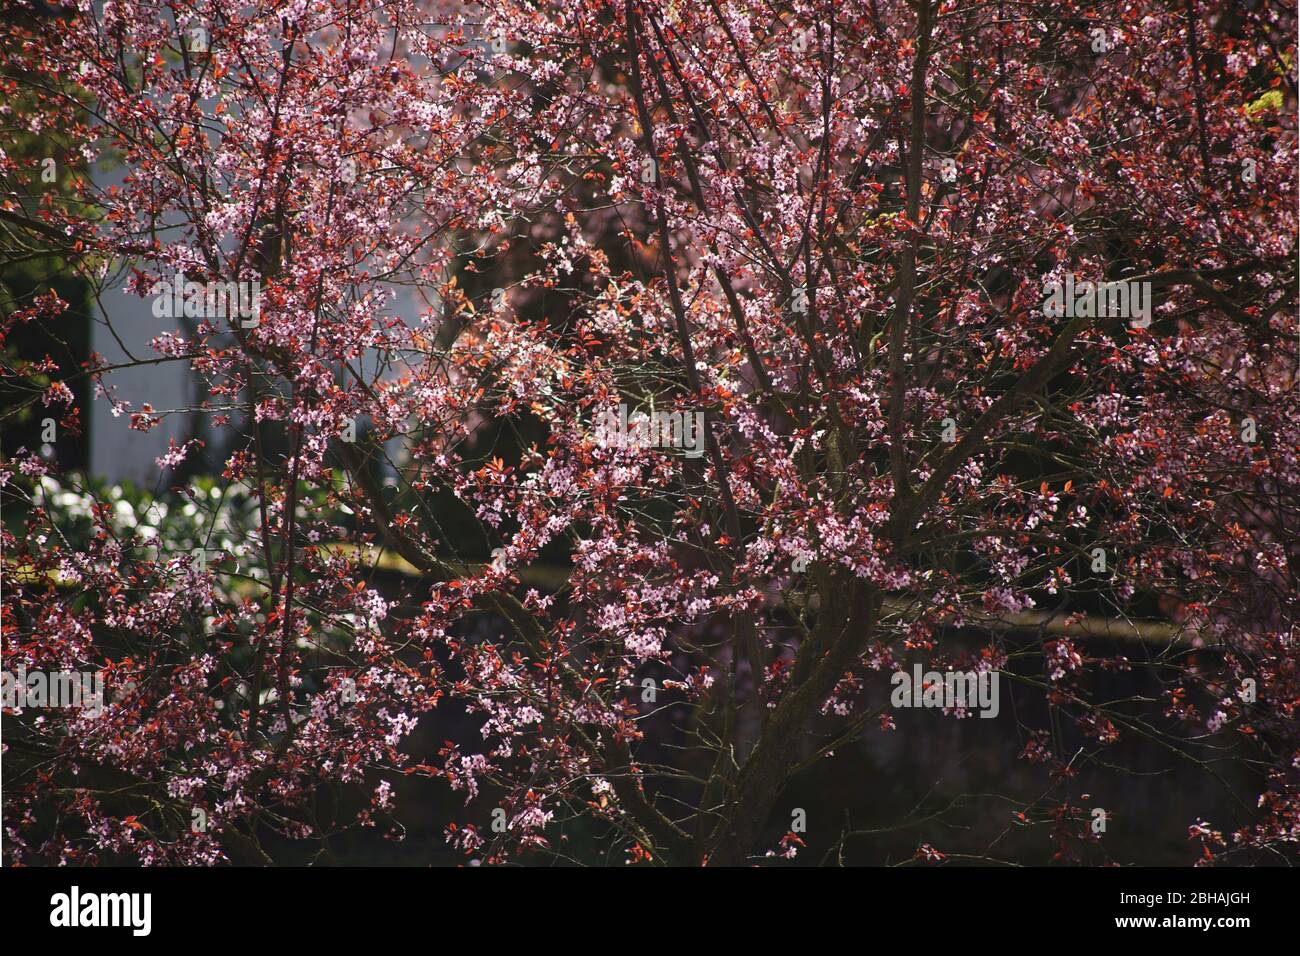 The light-flooded pink cherry blossom petals of a decorative cherry tree. Stock Photo